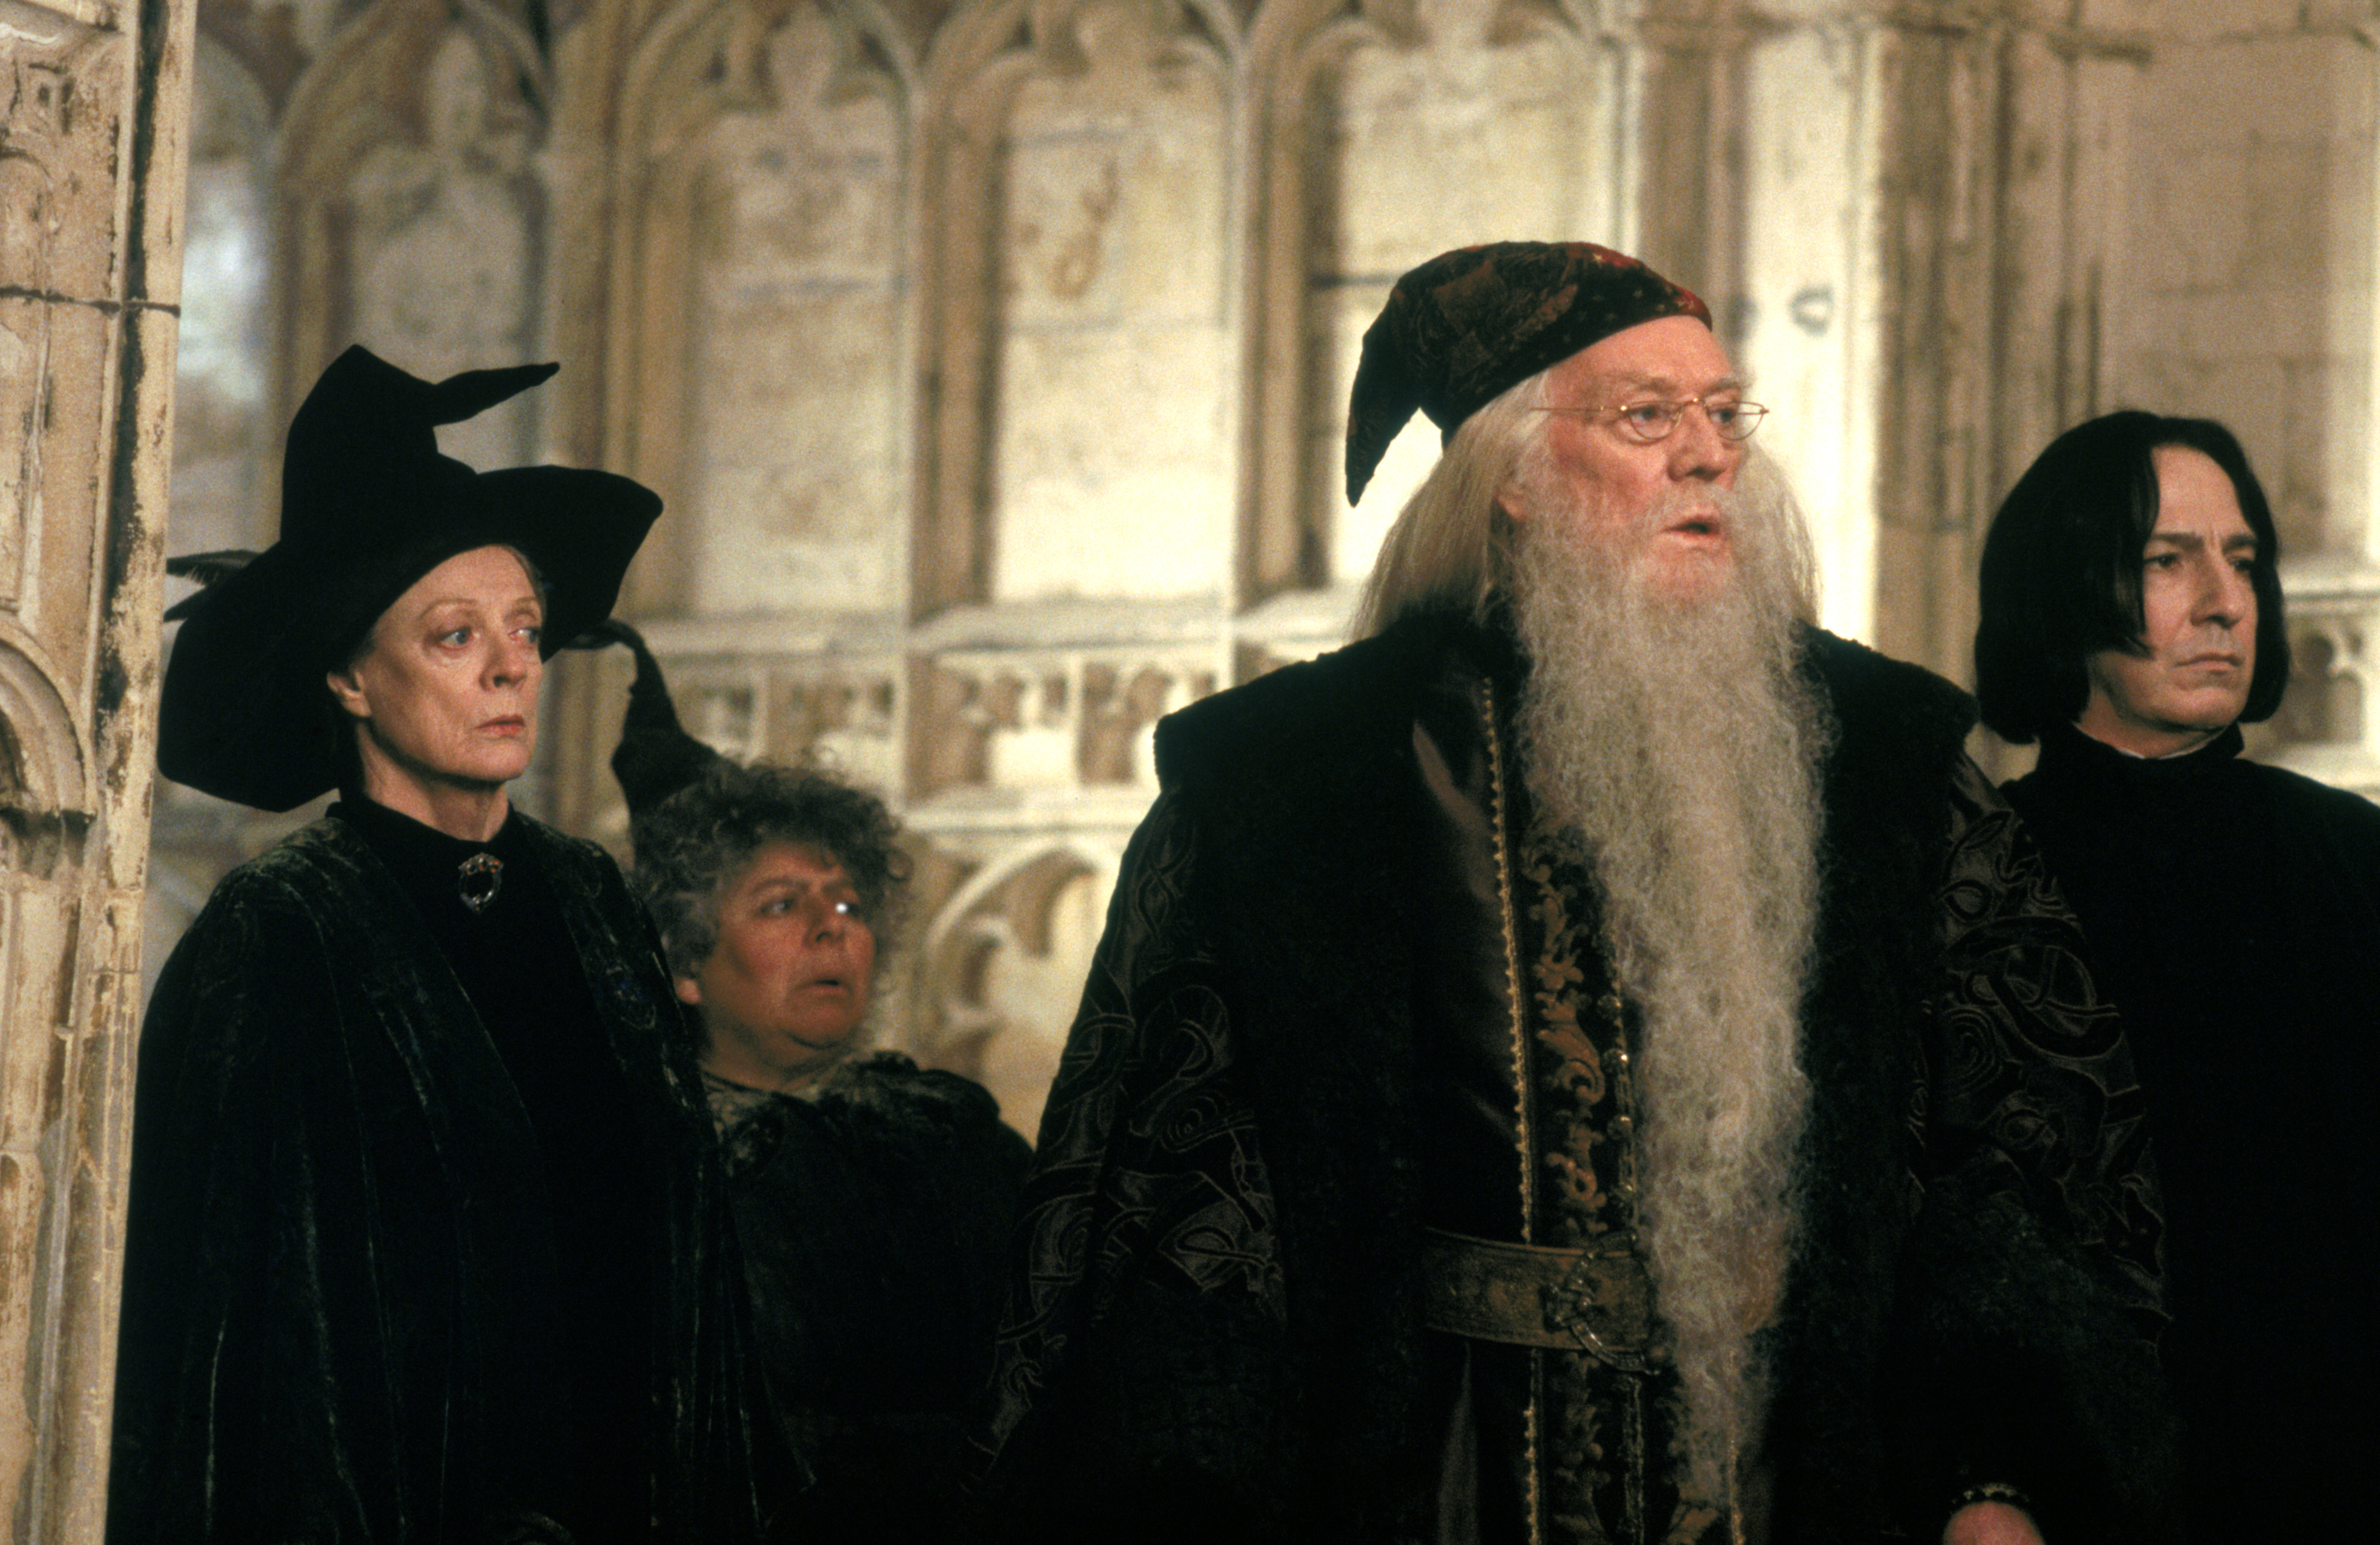 The Wisdom of Dumbledore: Harry Potter Characters 2